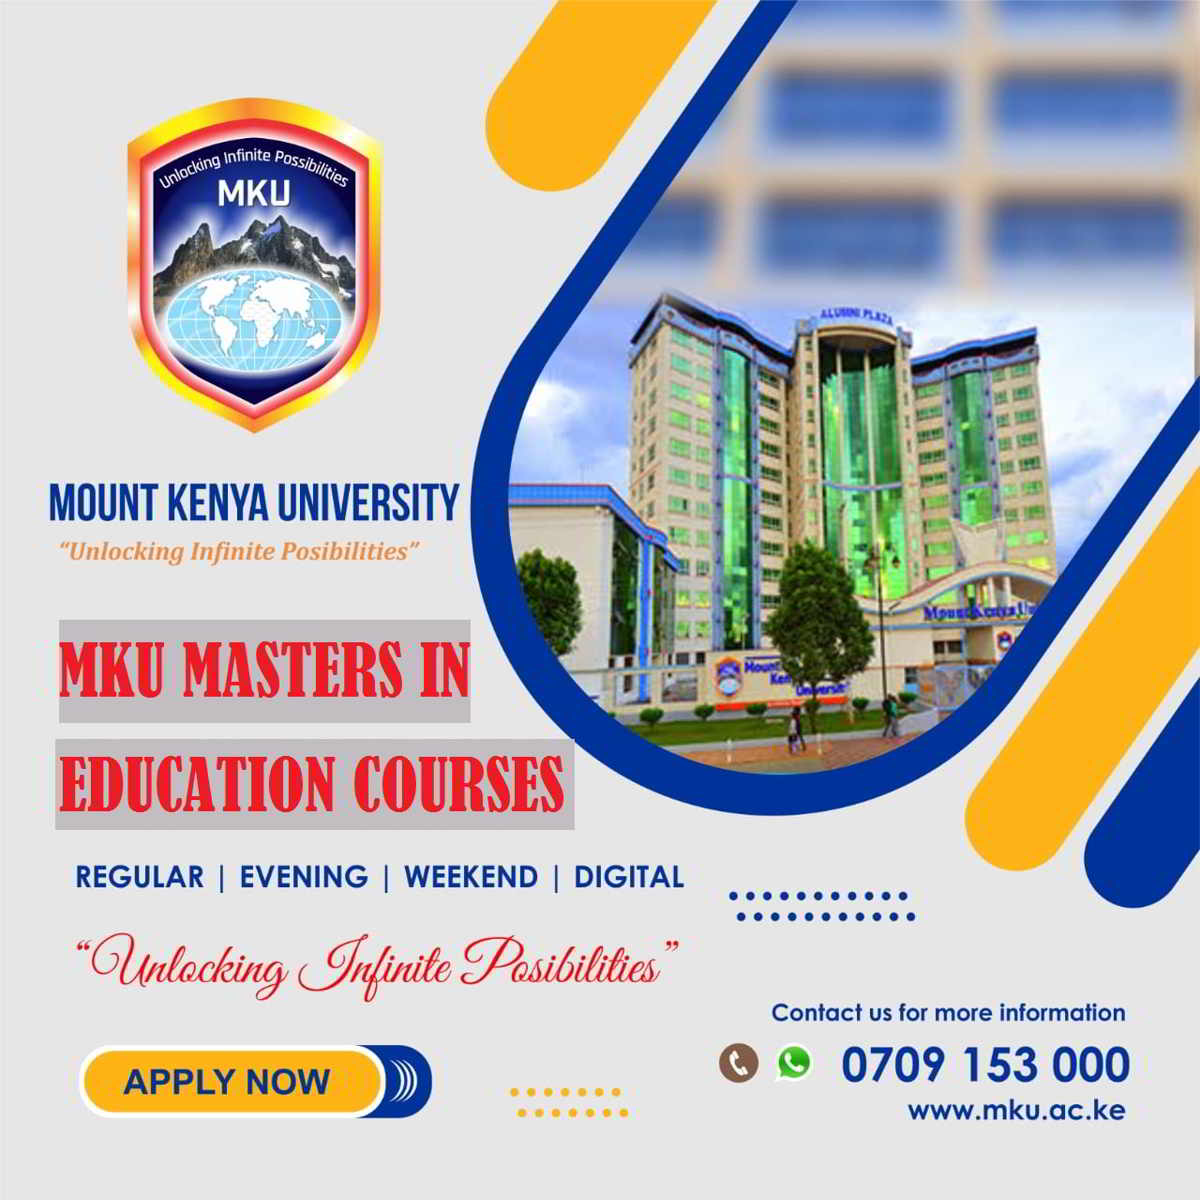 MKU Masters in education courses